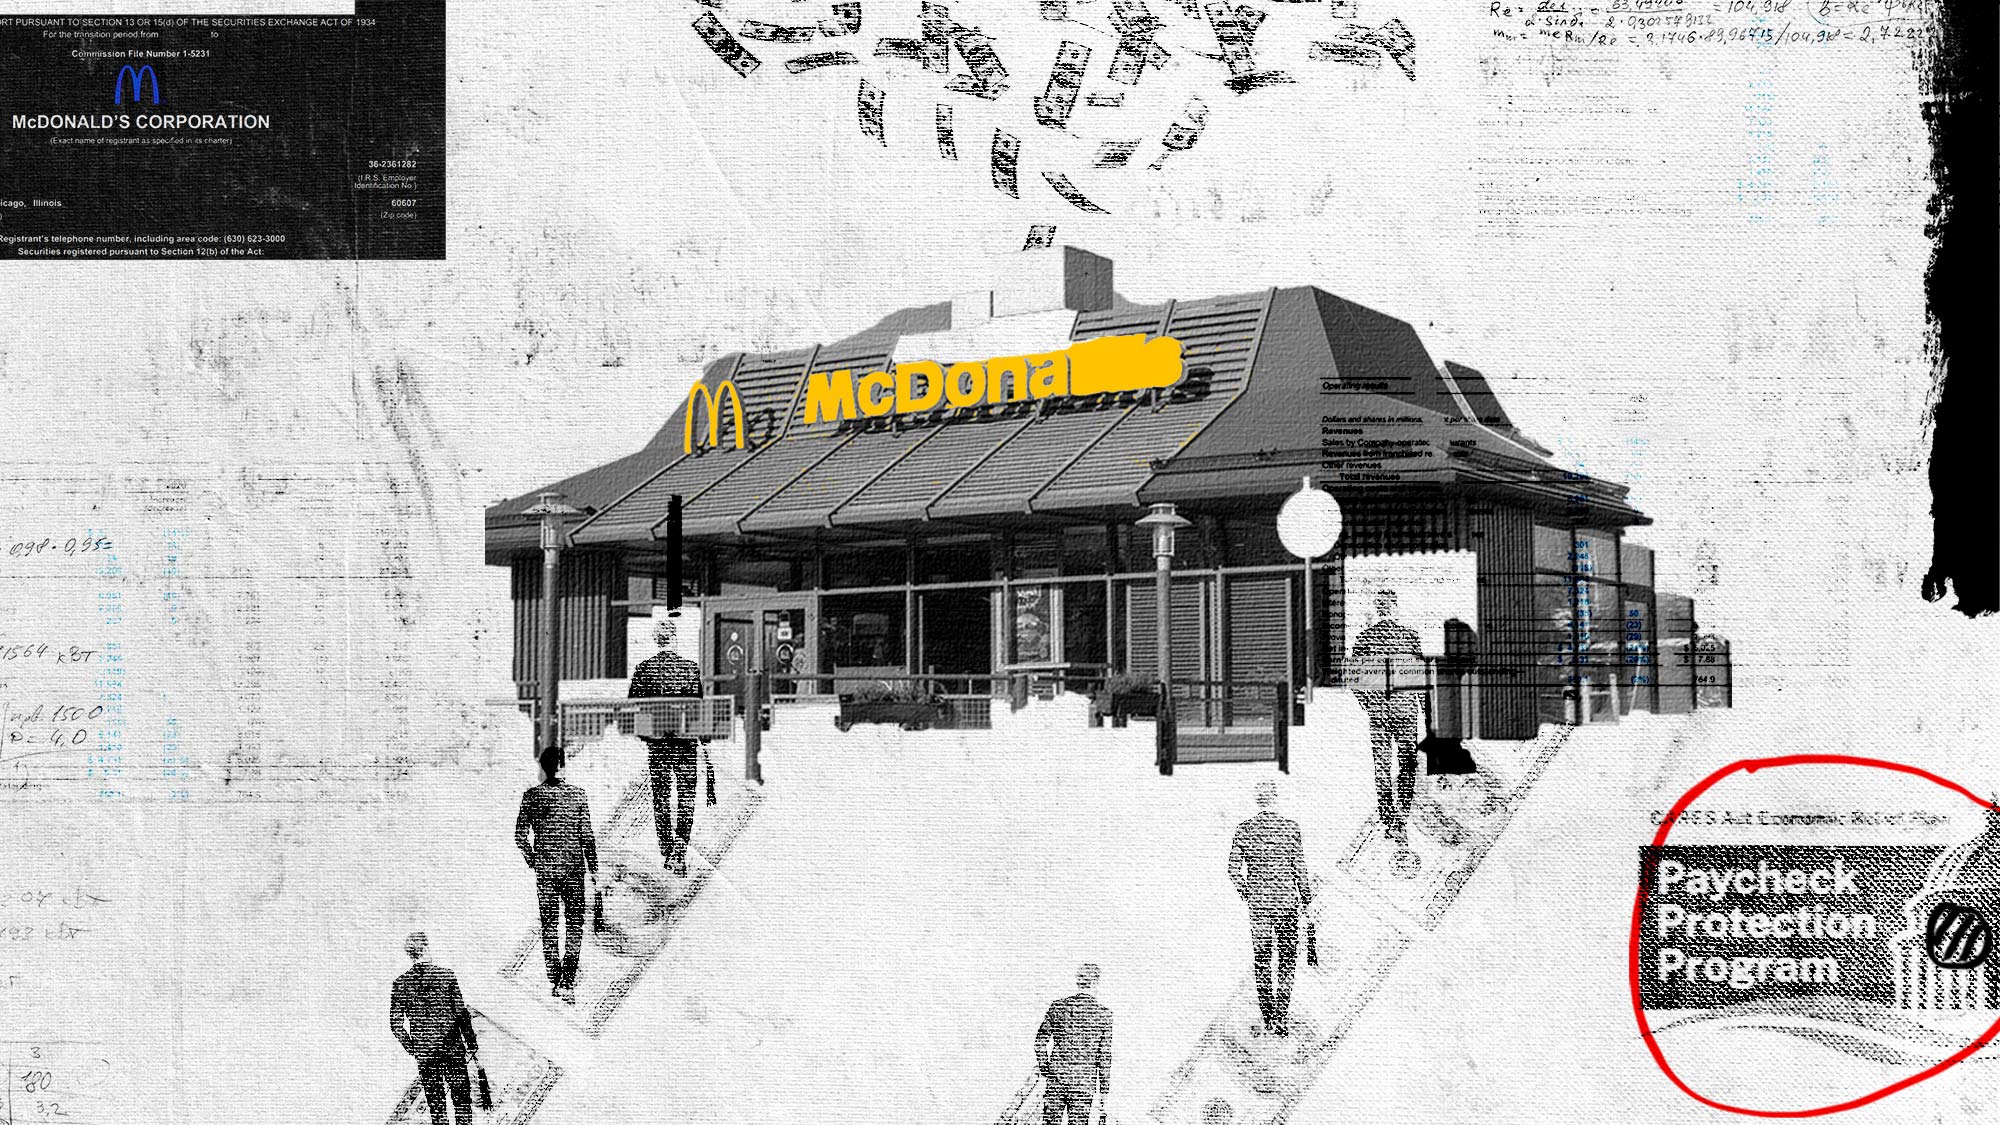 A Mcdonald's is centered with logo in bright yellow surrounded by reports, logos, numbers, money, and people all on a rough white background April 2022.